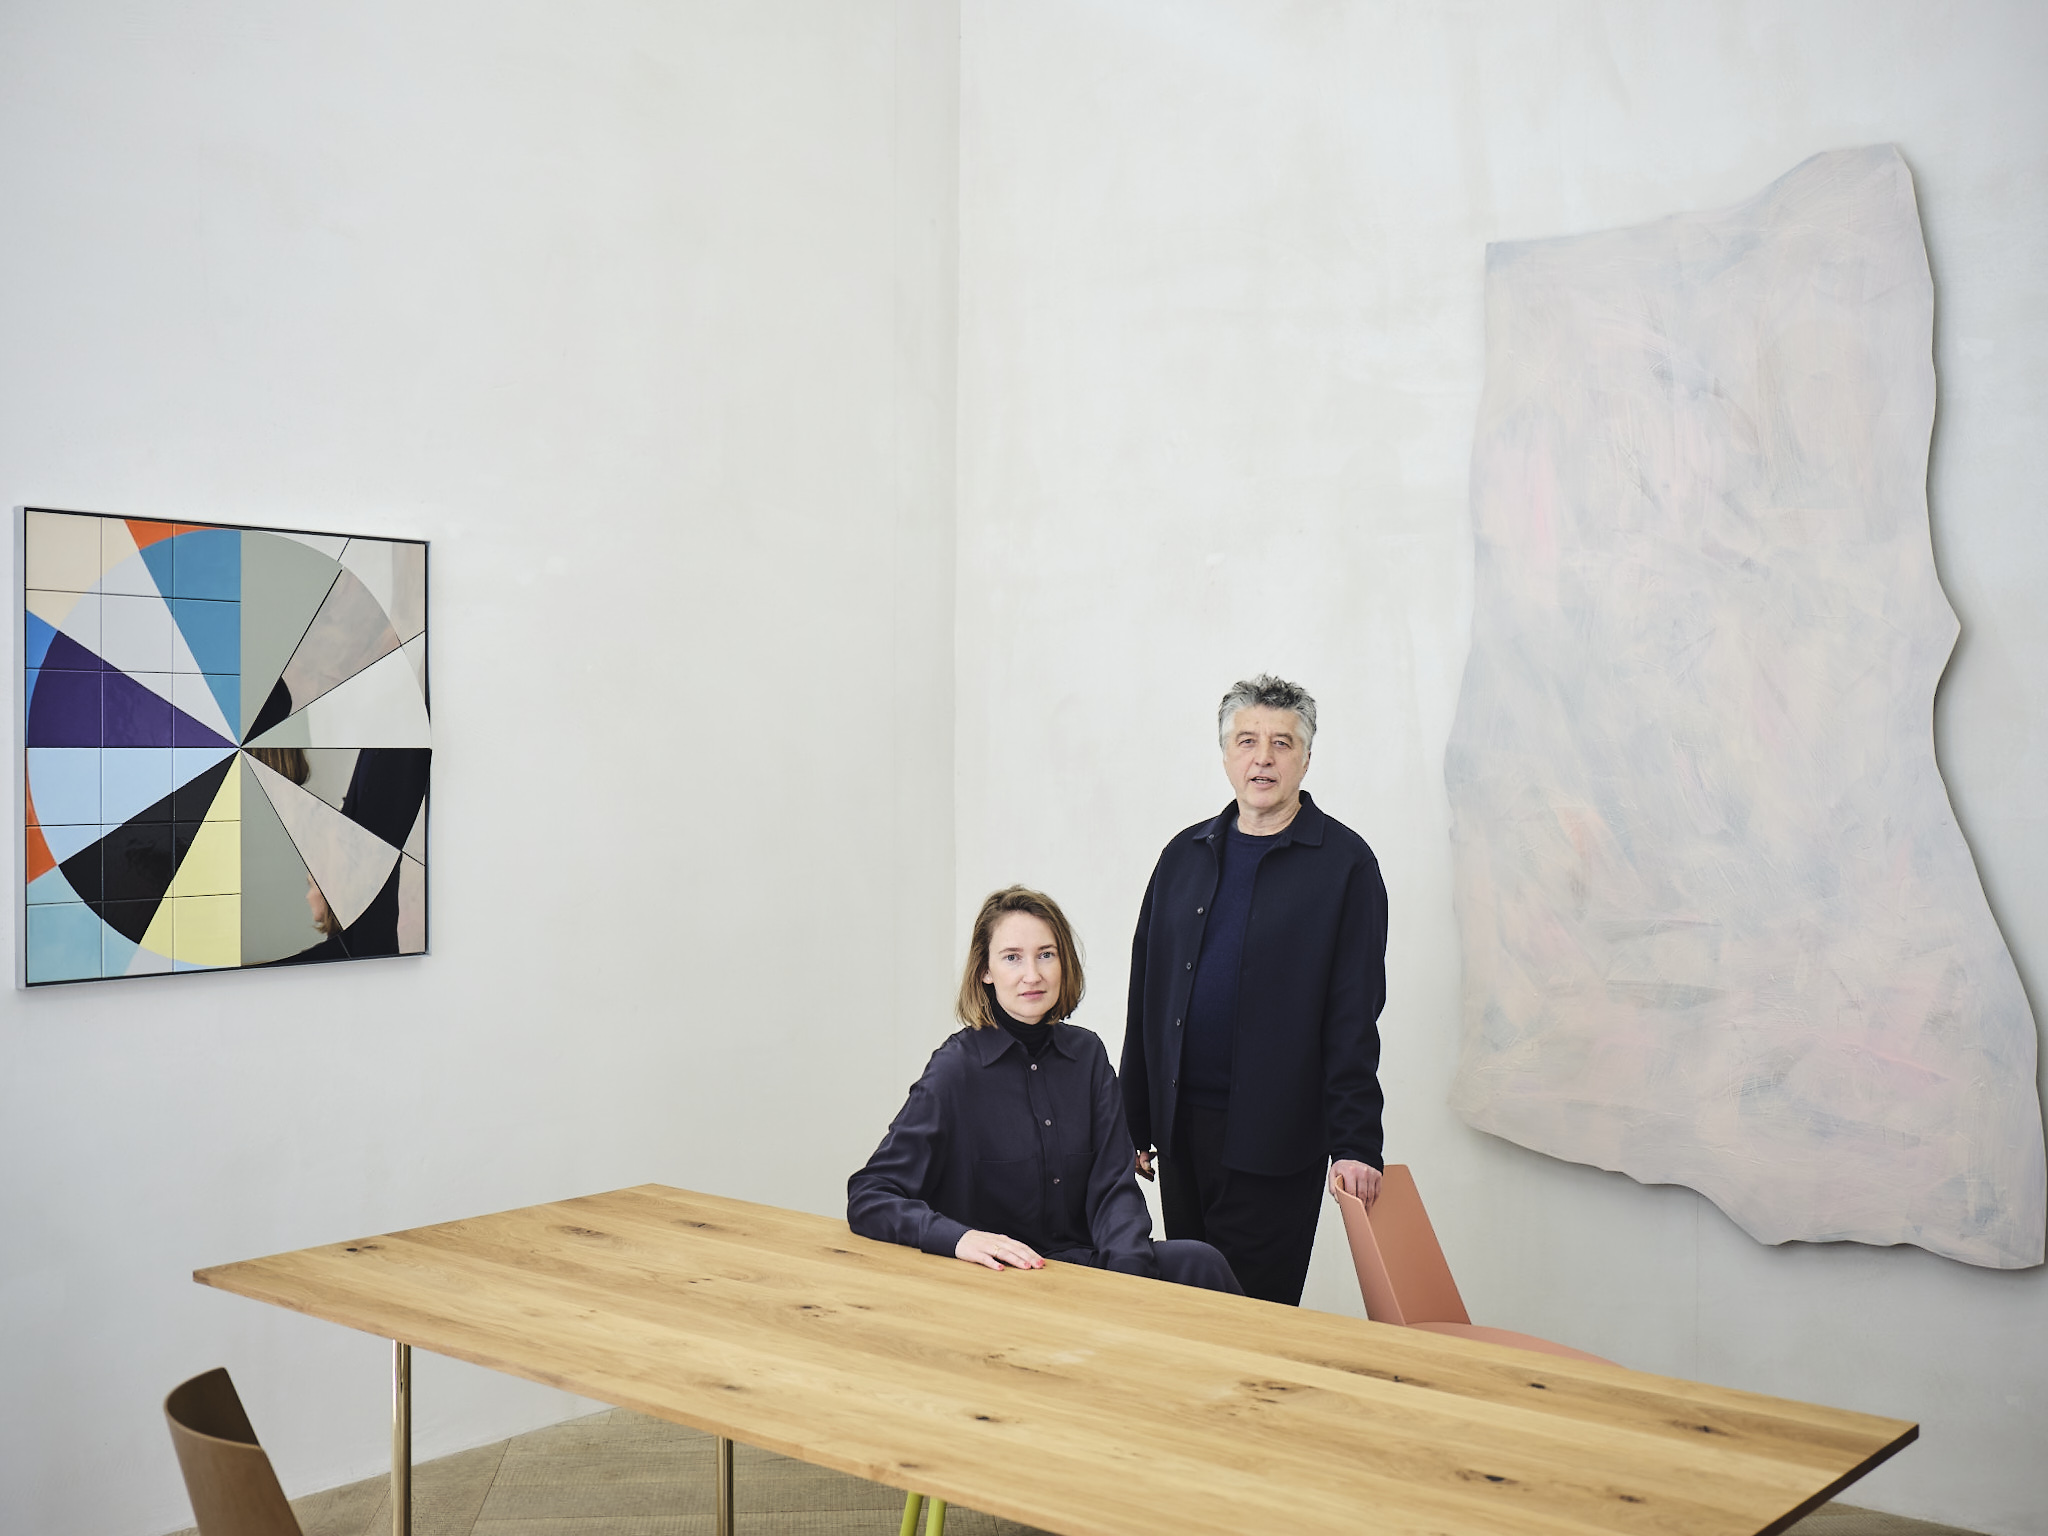 Curators of 'The Imaginary Collection' in Berlin,  Diandra Donecker & Andreas Murkudis, talk about must-see shows during Gallery Weekend Berlin and which artworks they fell in love with